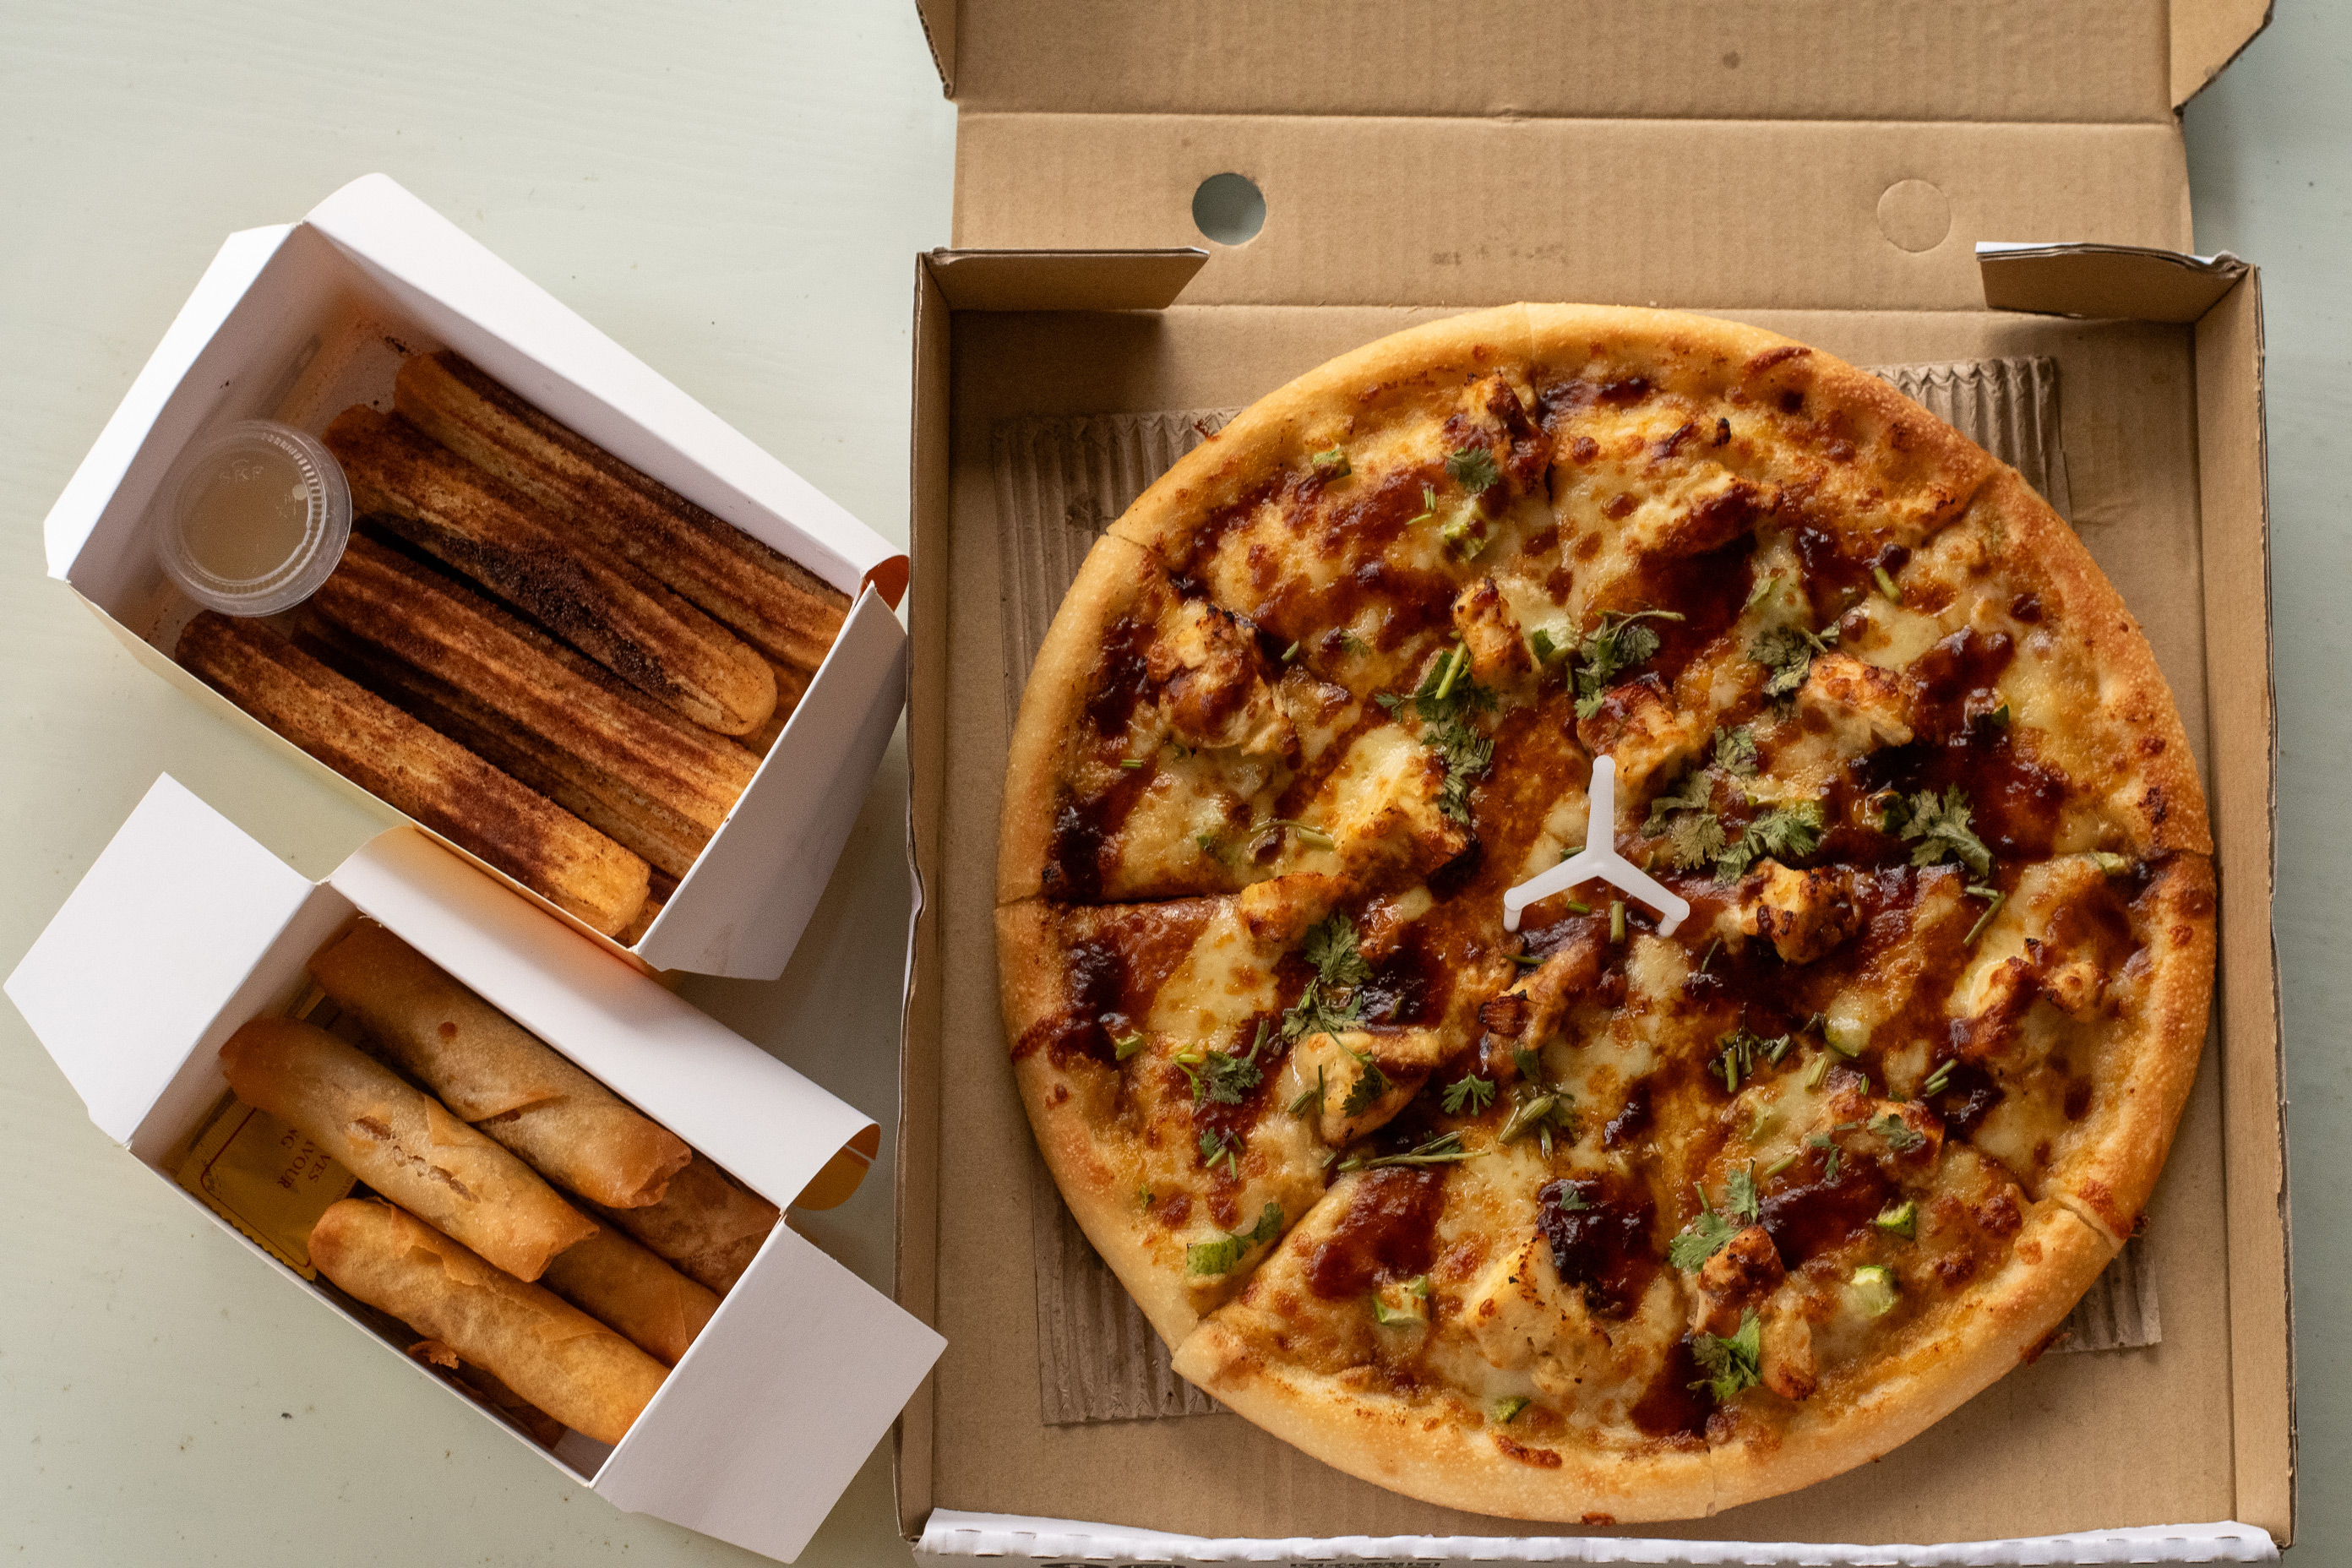 The National Day Menu items from Canadian Pizza. It shows the chicken rice pizza and milo churros.